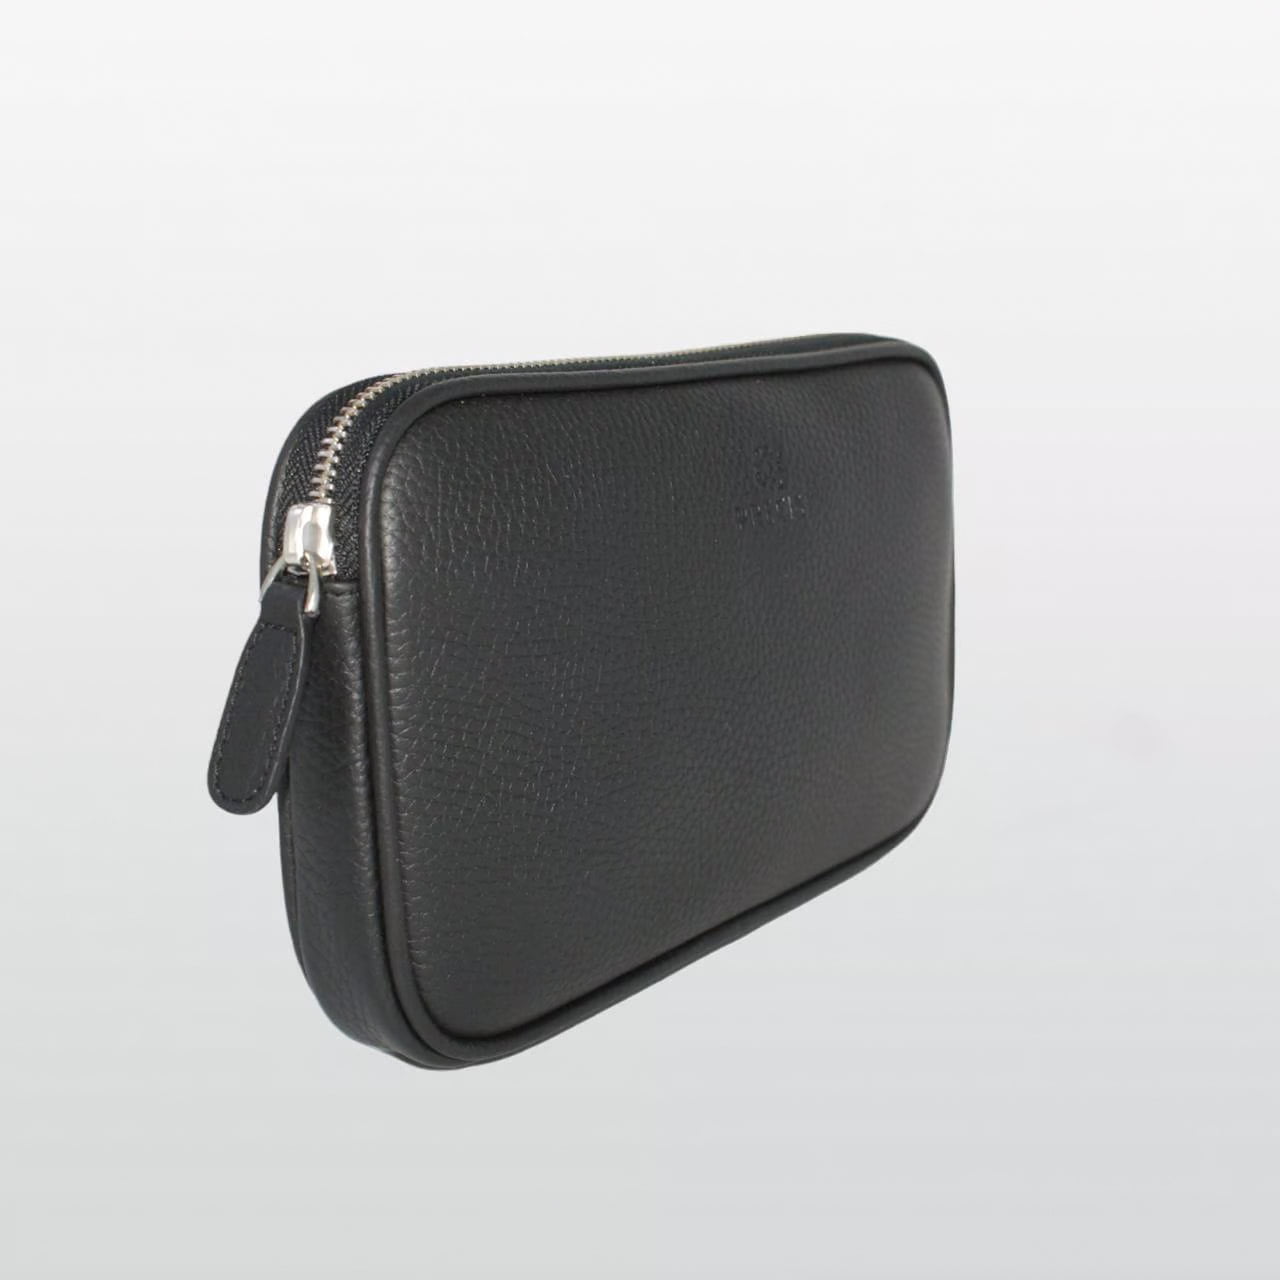 Unisex Small Carrying Bag Black